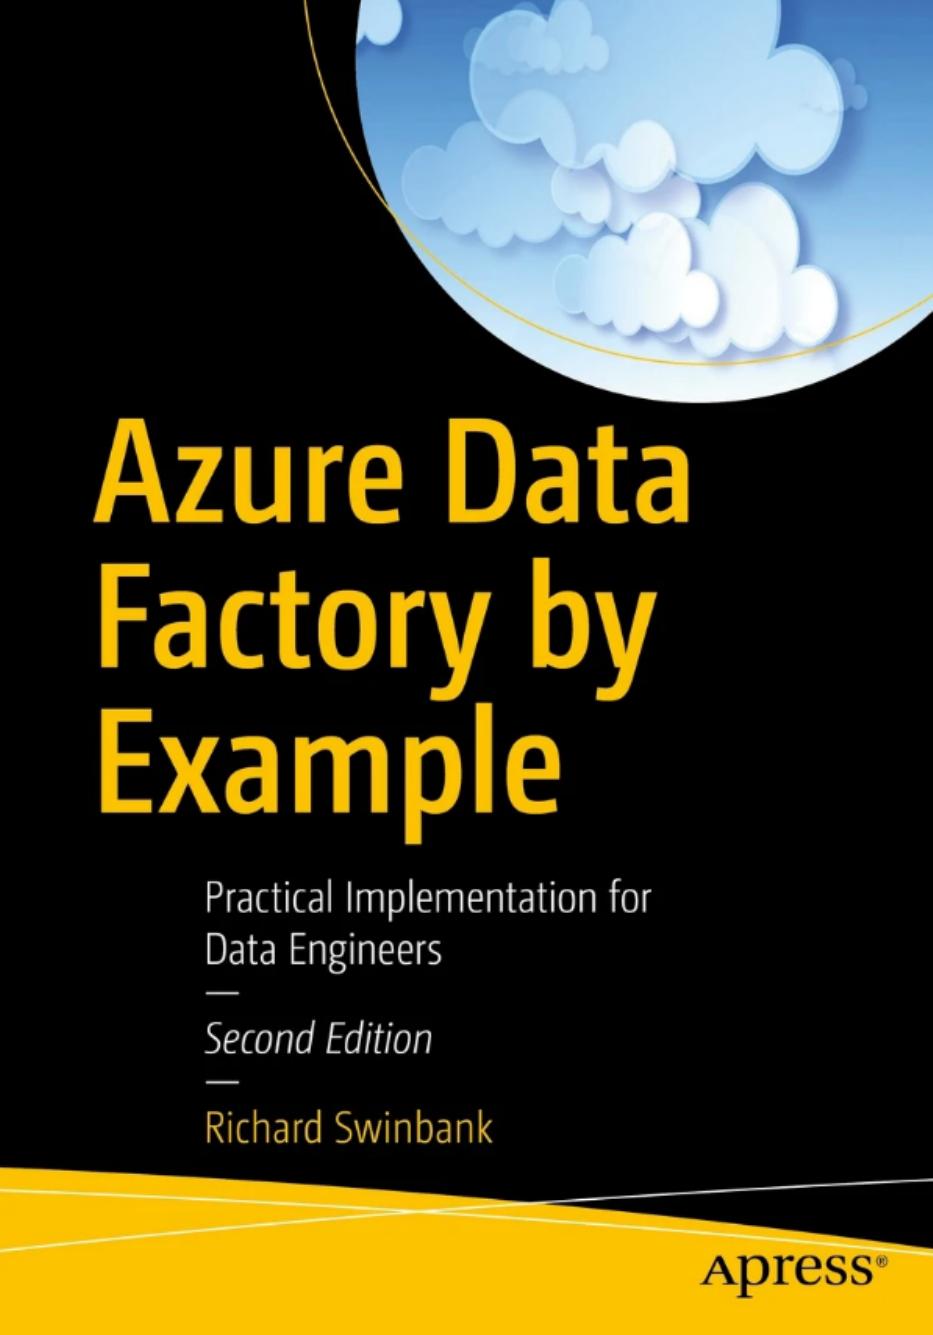 Azure Data Factory by Example: Practical Implementation for Data Engineers 2nd Edition